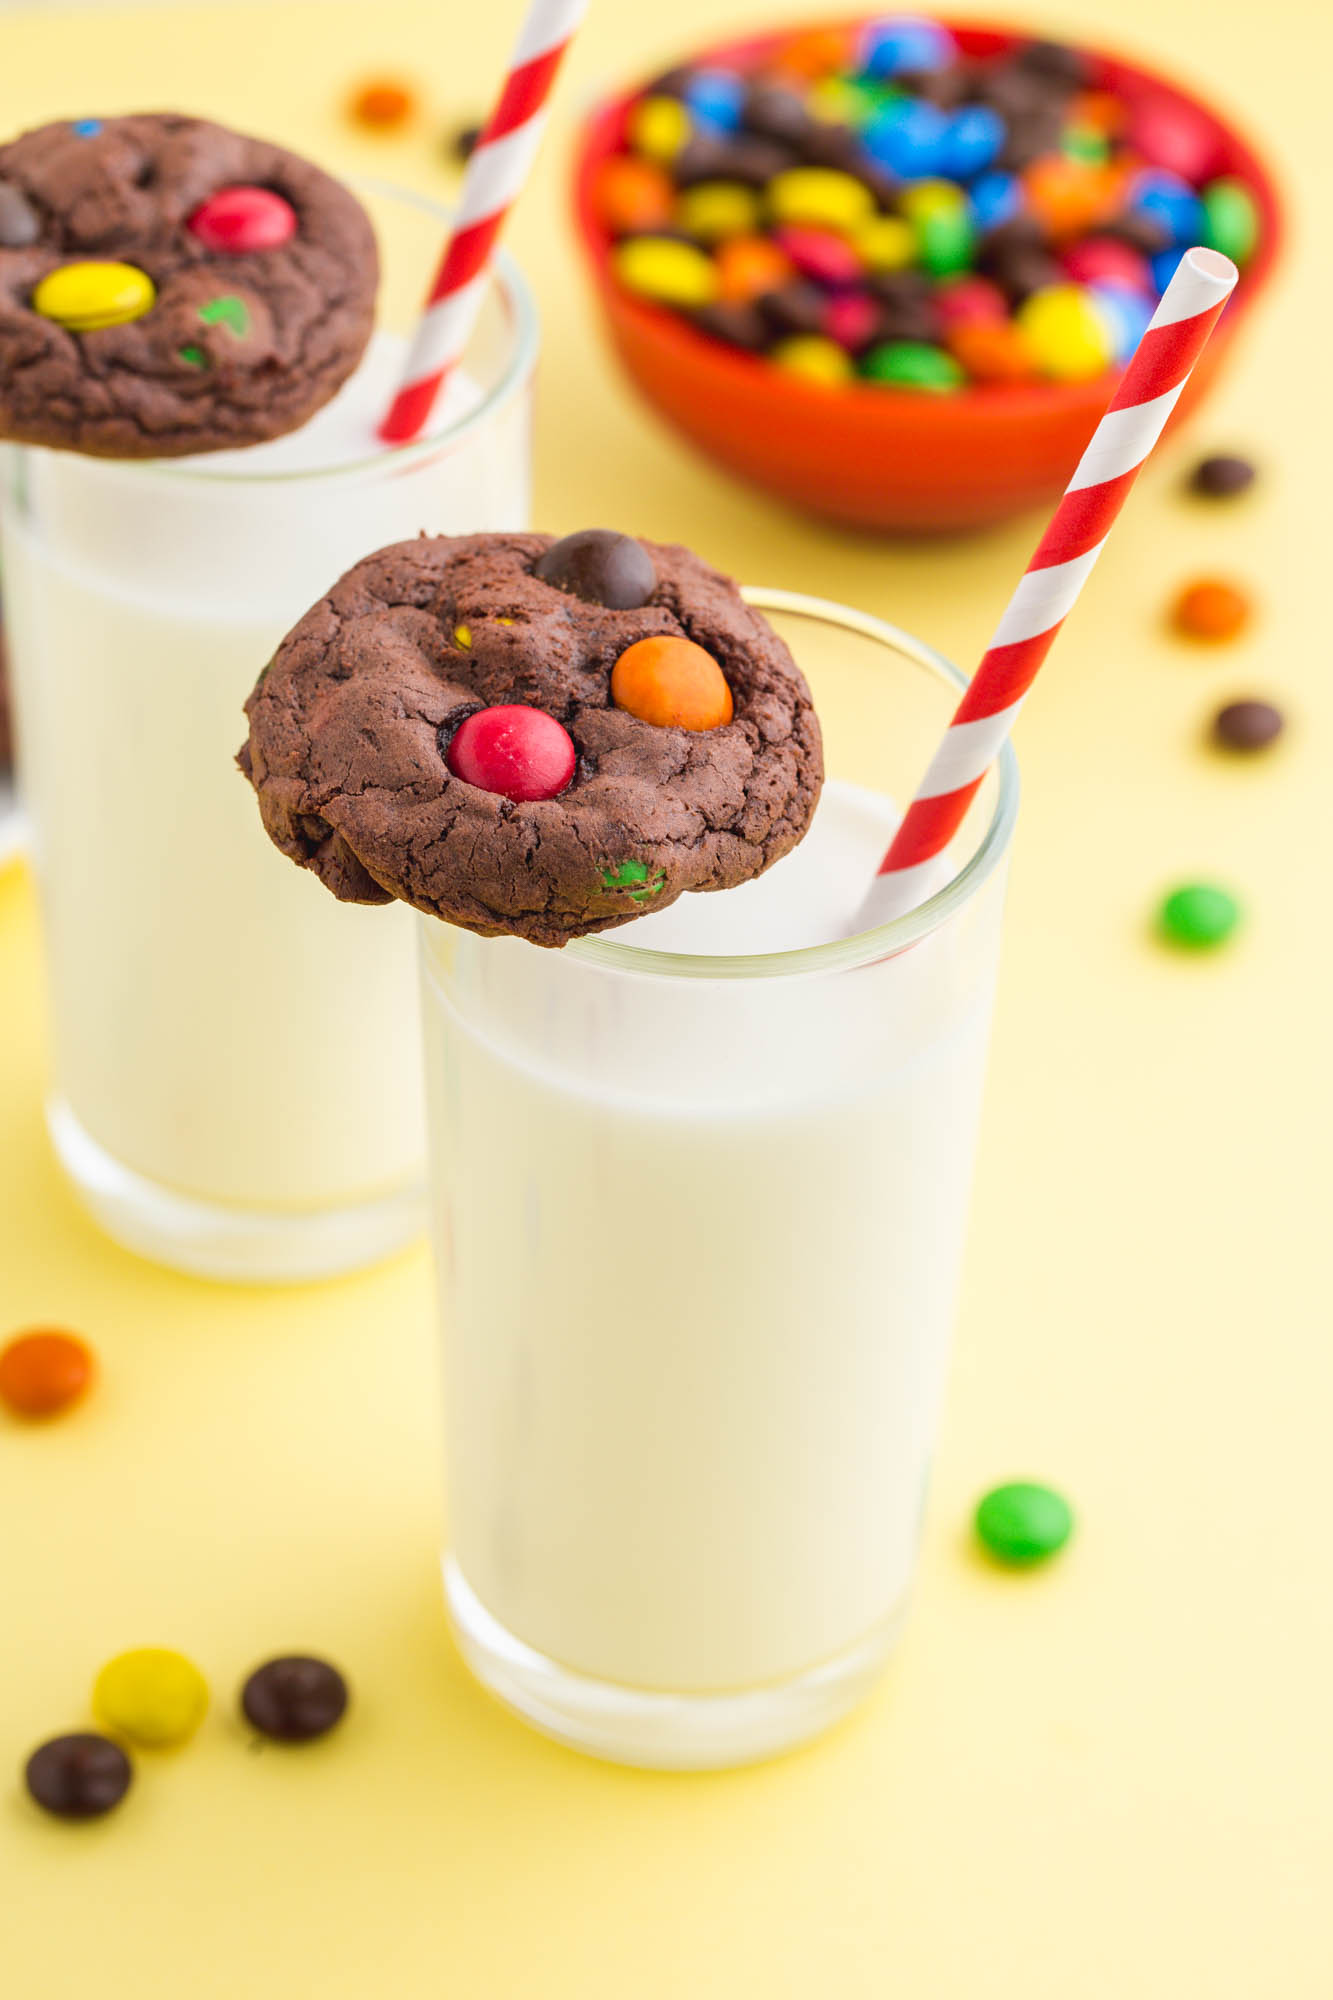 two glasses of milk with red and white striped paper strays and chocolate m&m brownie cookies balanced on top.